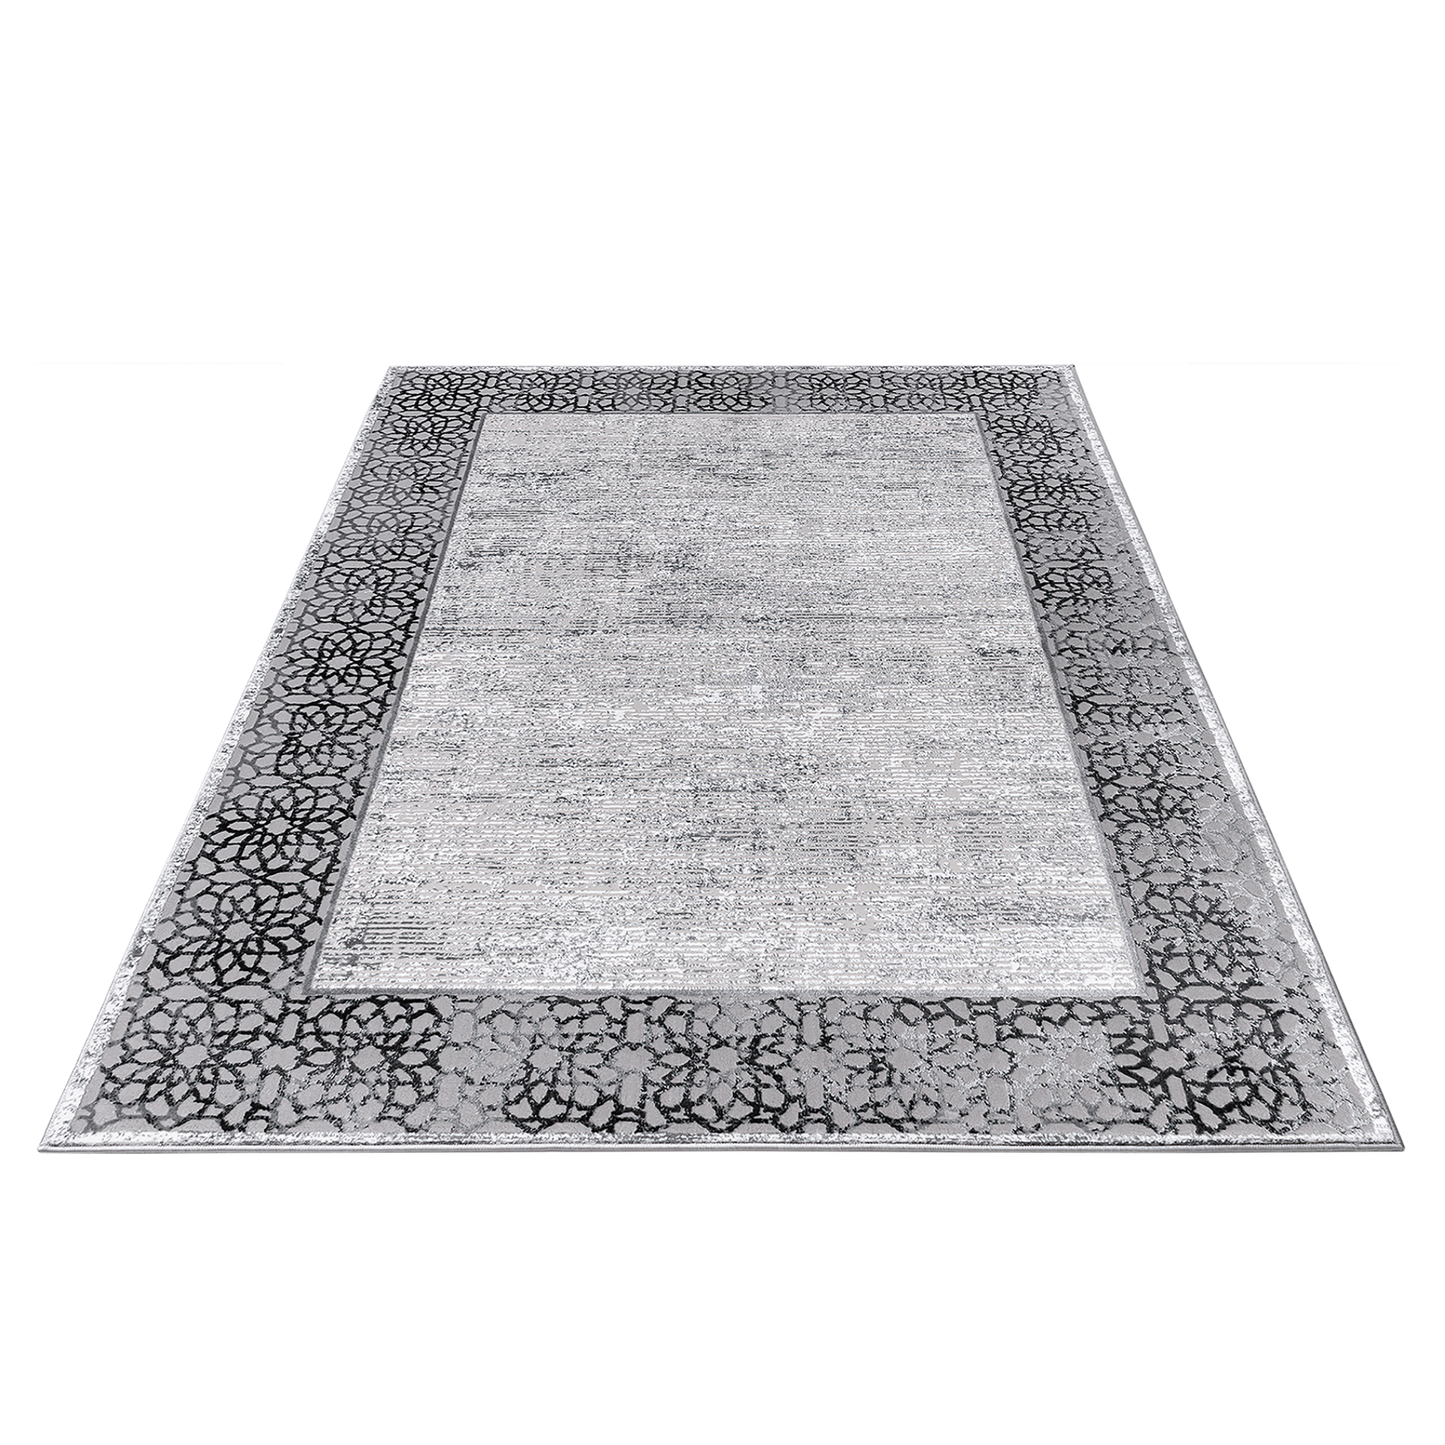 Rectangle Grey Mandala Area Rug with black motifs at the edges